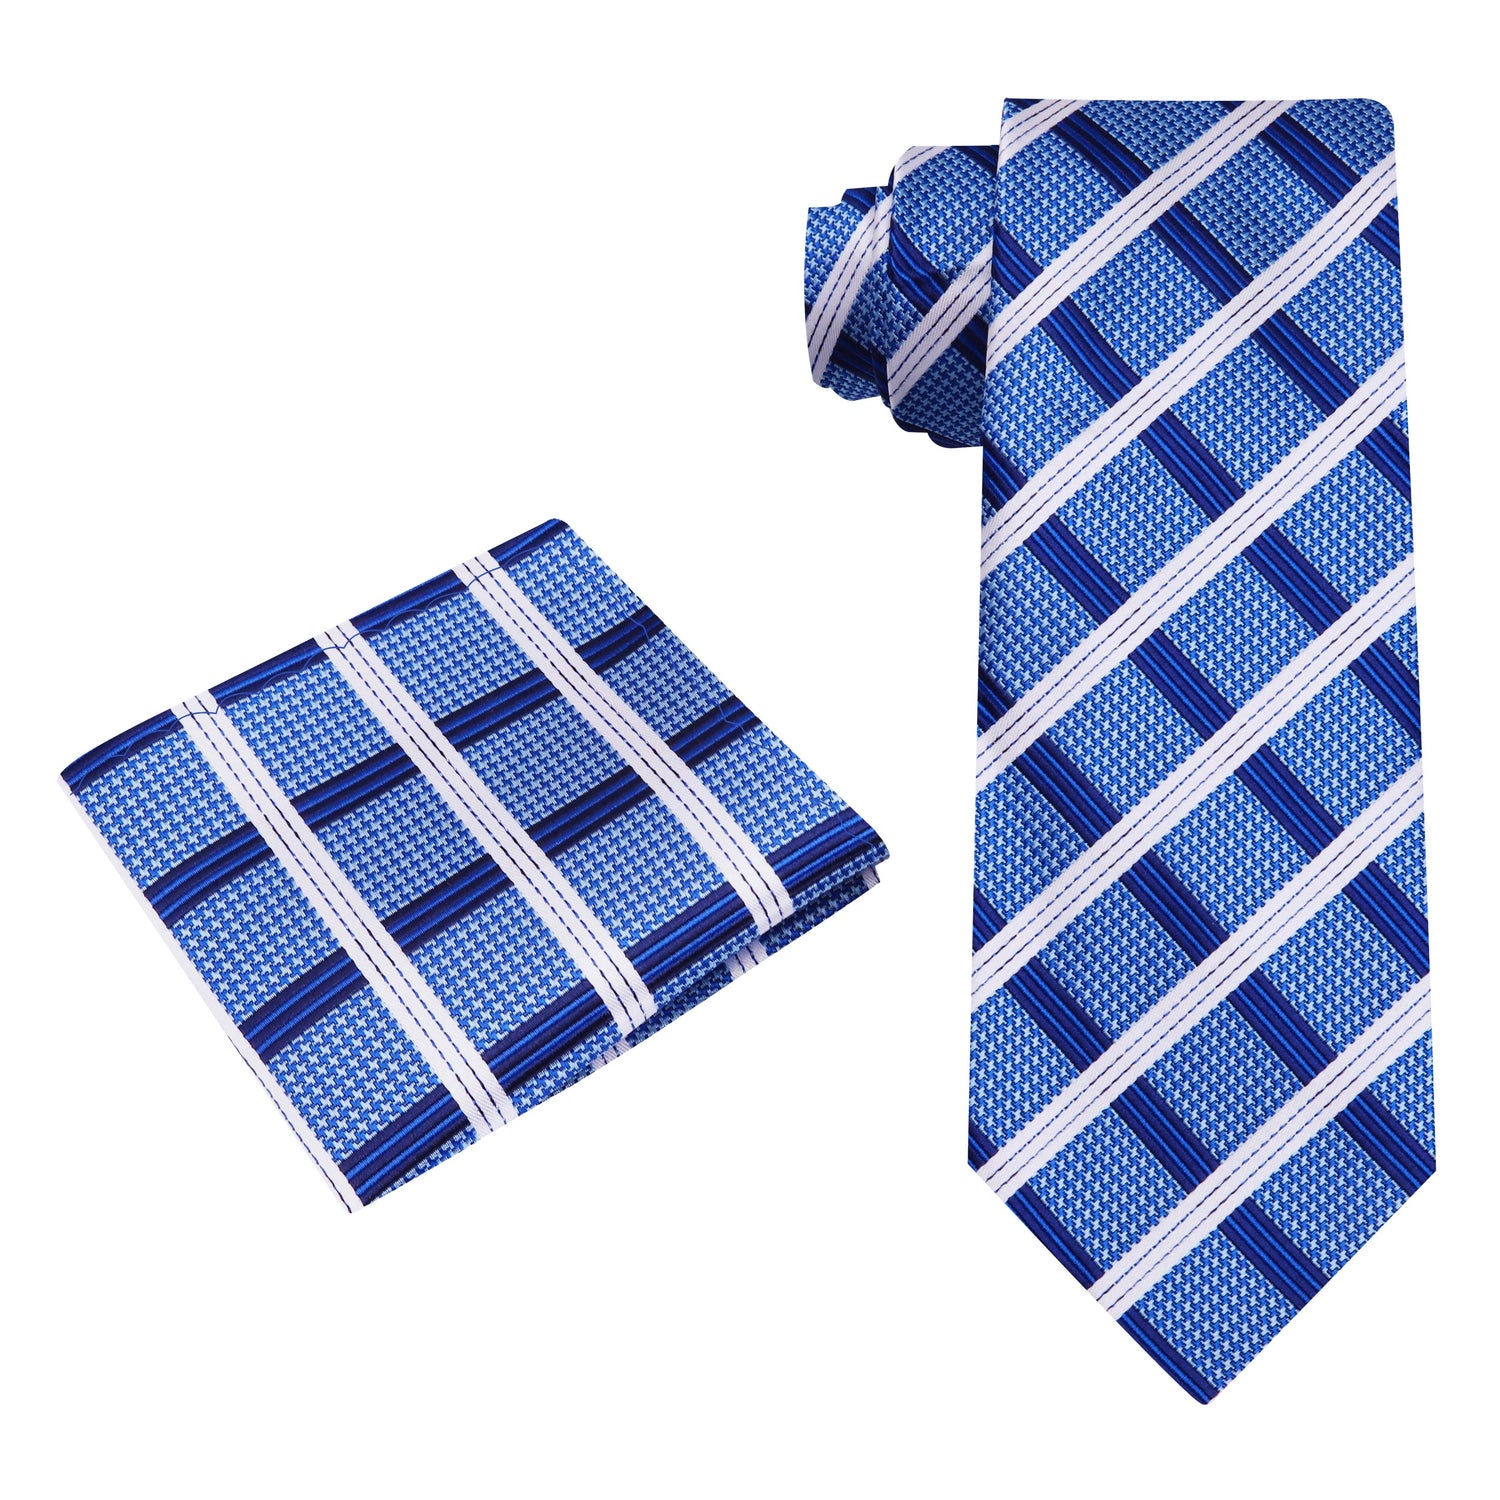 Alt View: Blue and White Plaid Tie and Pocket Square